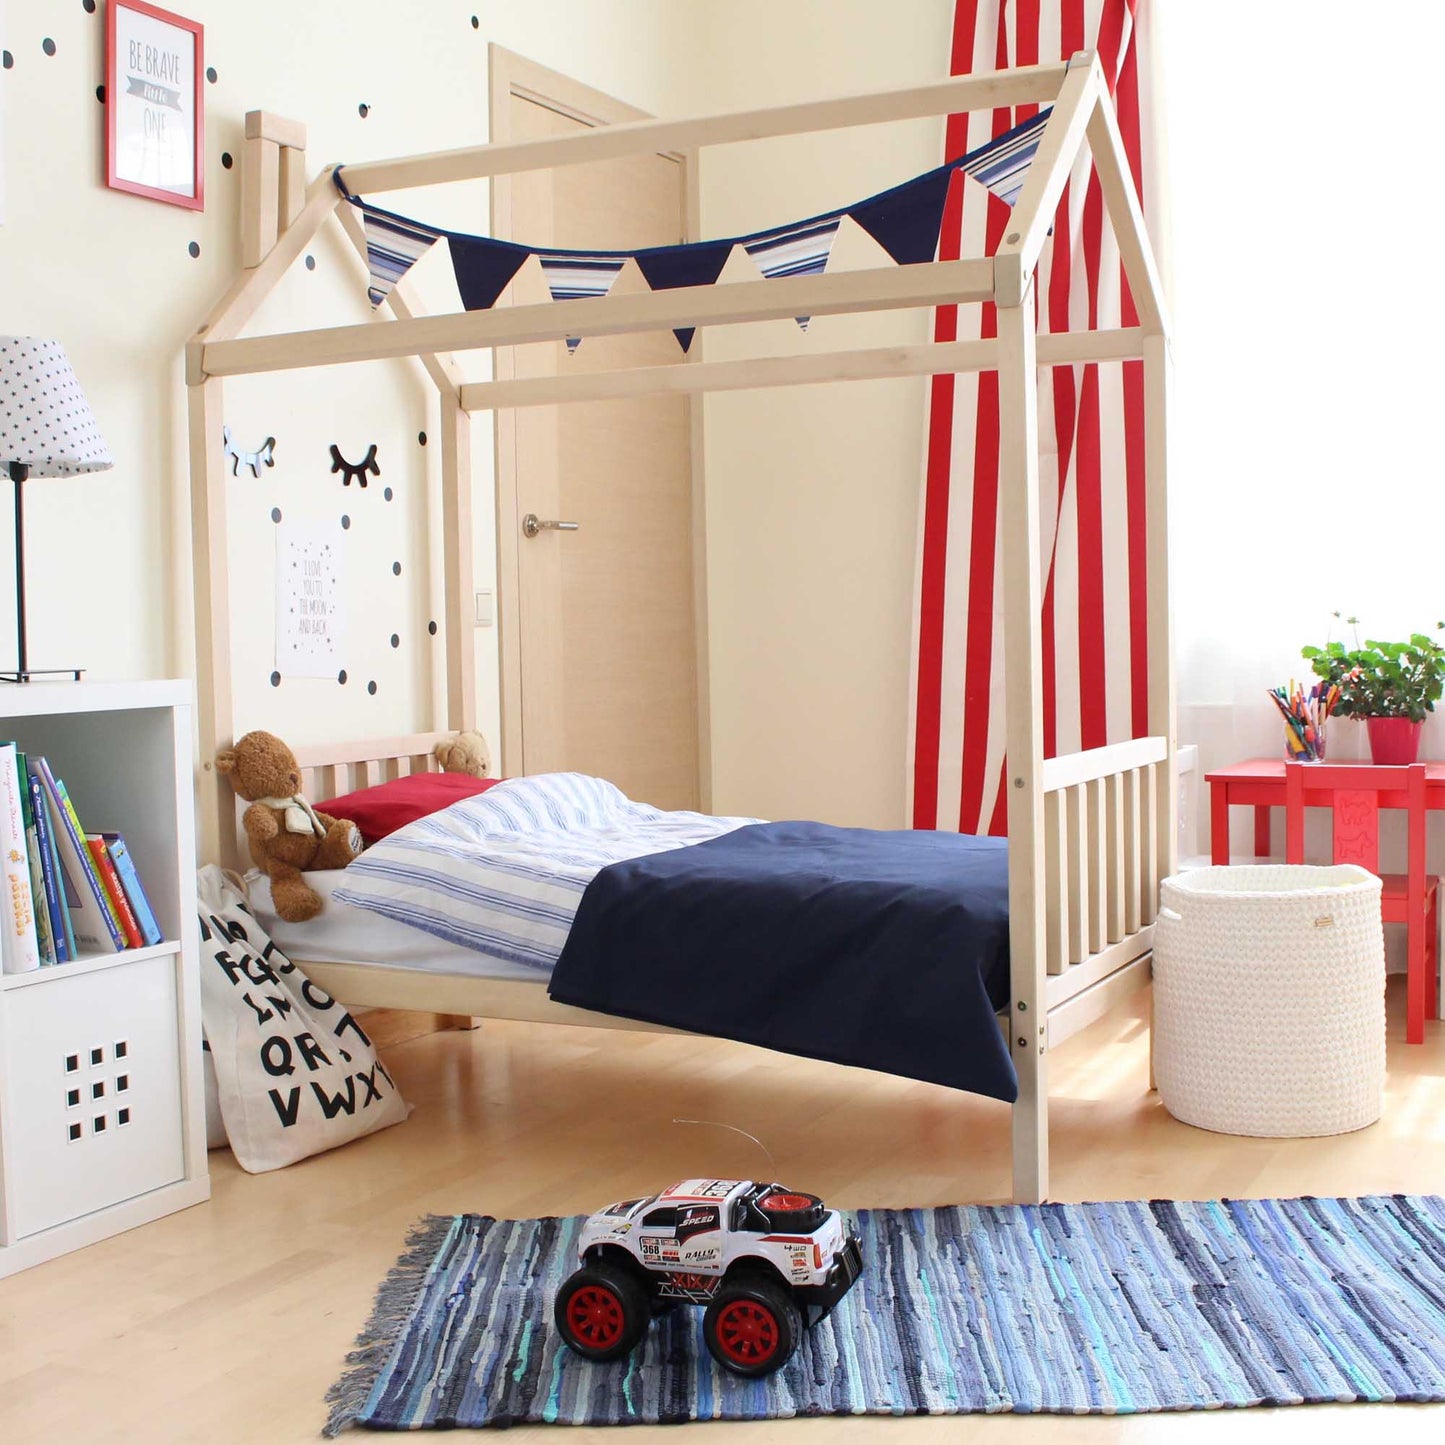 A Toddler house bed on legs with a headboard and footboard in a child's room.